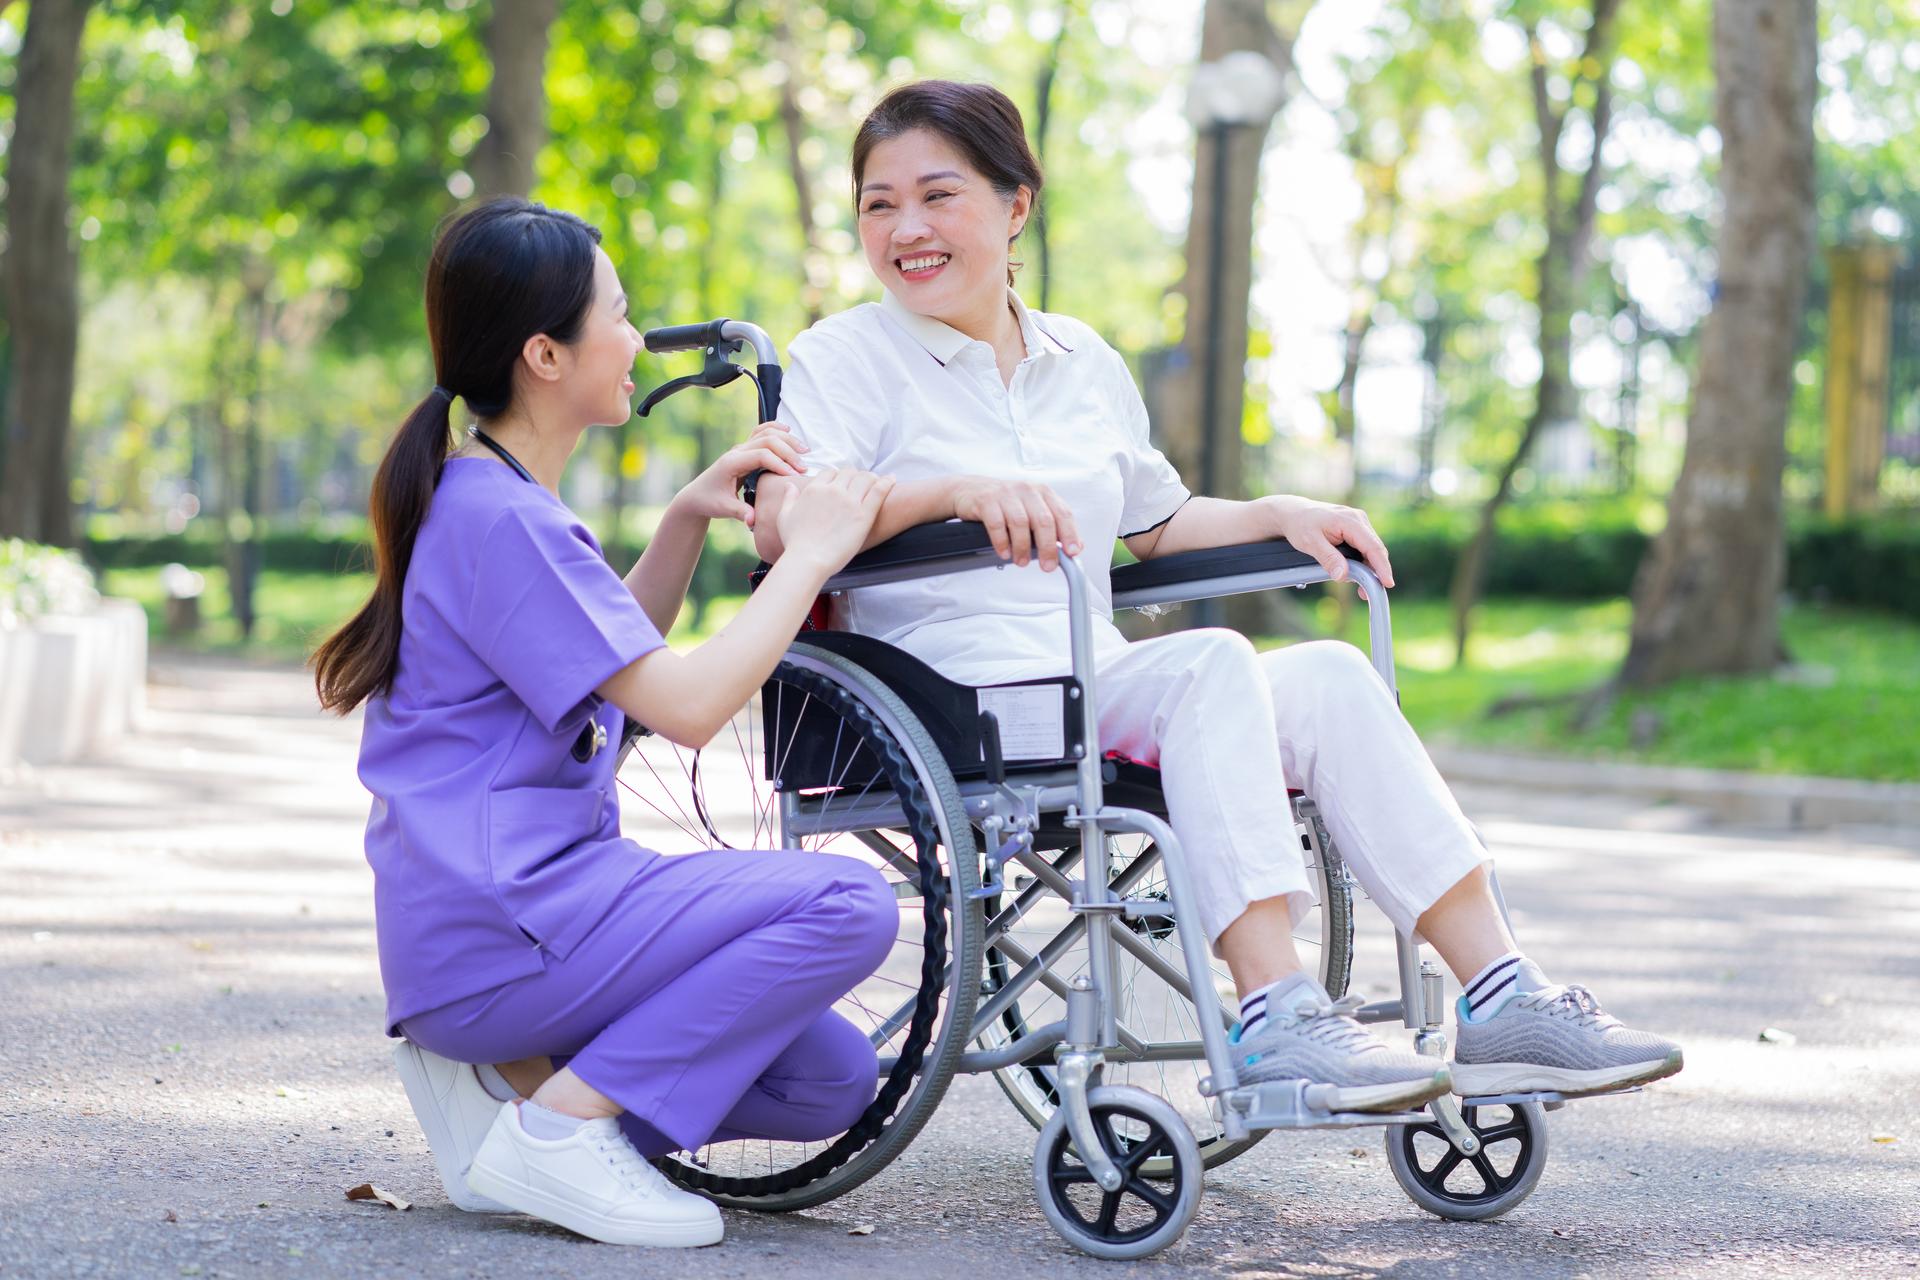 A nurse helps a patient in a wheelchair navigate an outdoor courtyard, both are smiling and having a nice time.